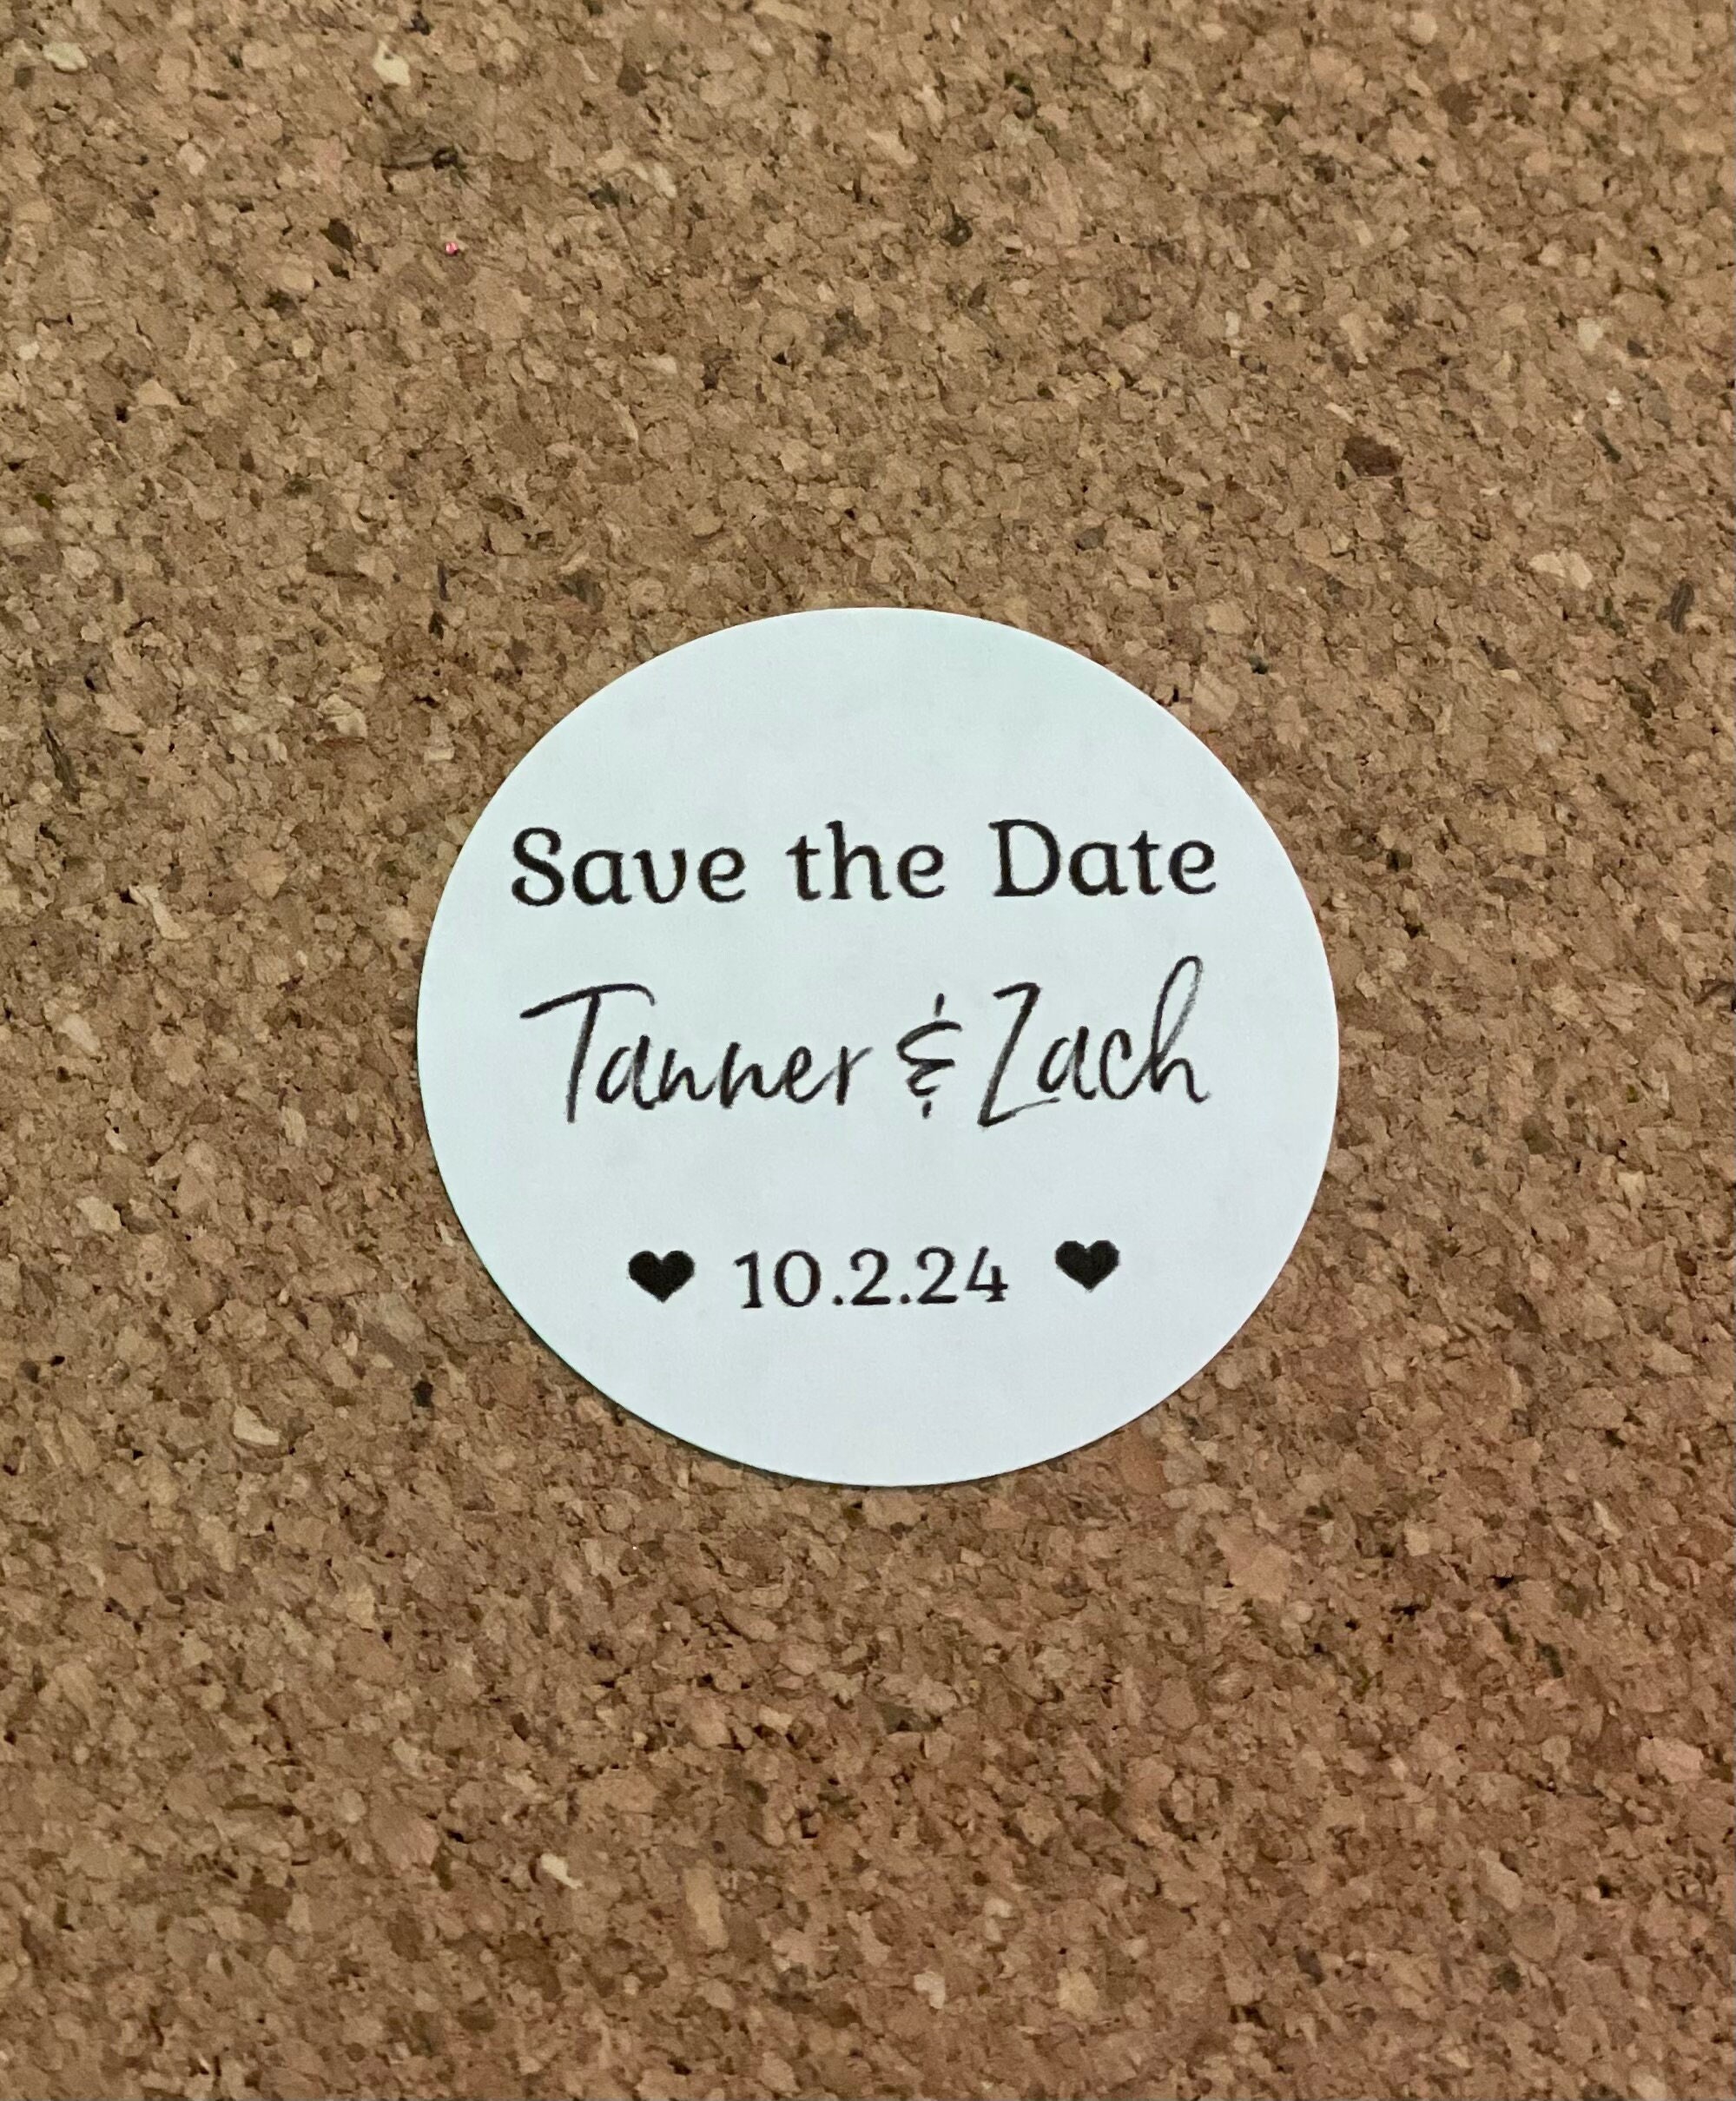 1.5 Save the Date Stickers, Round Label for Envelopes, Custom Wedding  Labels for Mailing Postcards, Wedding Initial Name Envelope Seal 